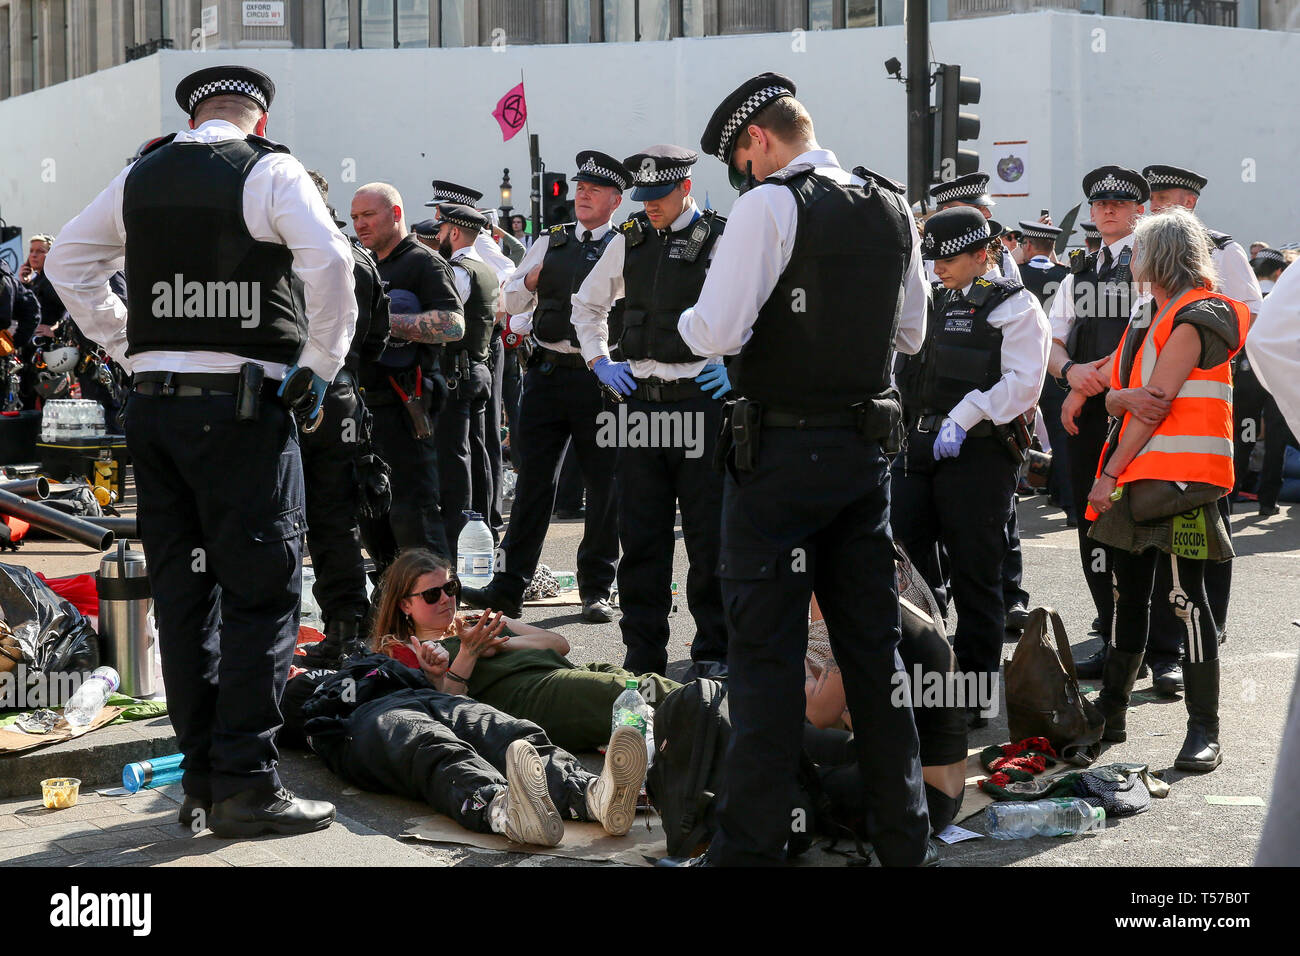 Environmental activists are seen being arrested by the police officers at the Oxford Circus during the fifth day of the climate change protest by the Extinction Rebellion movement group. A large number of police presence around the pink yacht as they un-bond the activists who glued themselves and the police prepares to remove them from the site. According to the Met Police, over 1000 activists have been arrested since the demonstration started on 11 April 2019. Stock Photo